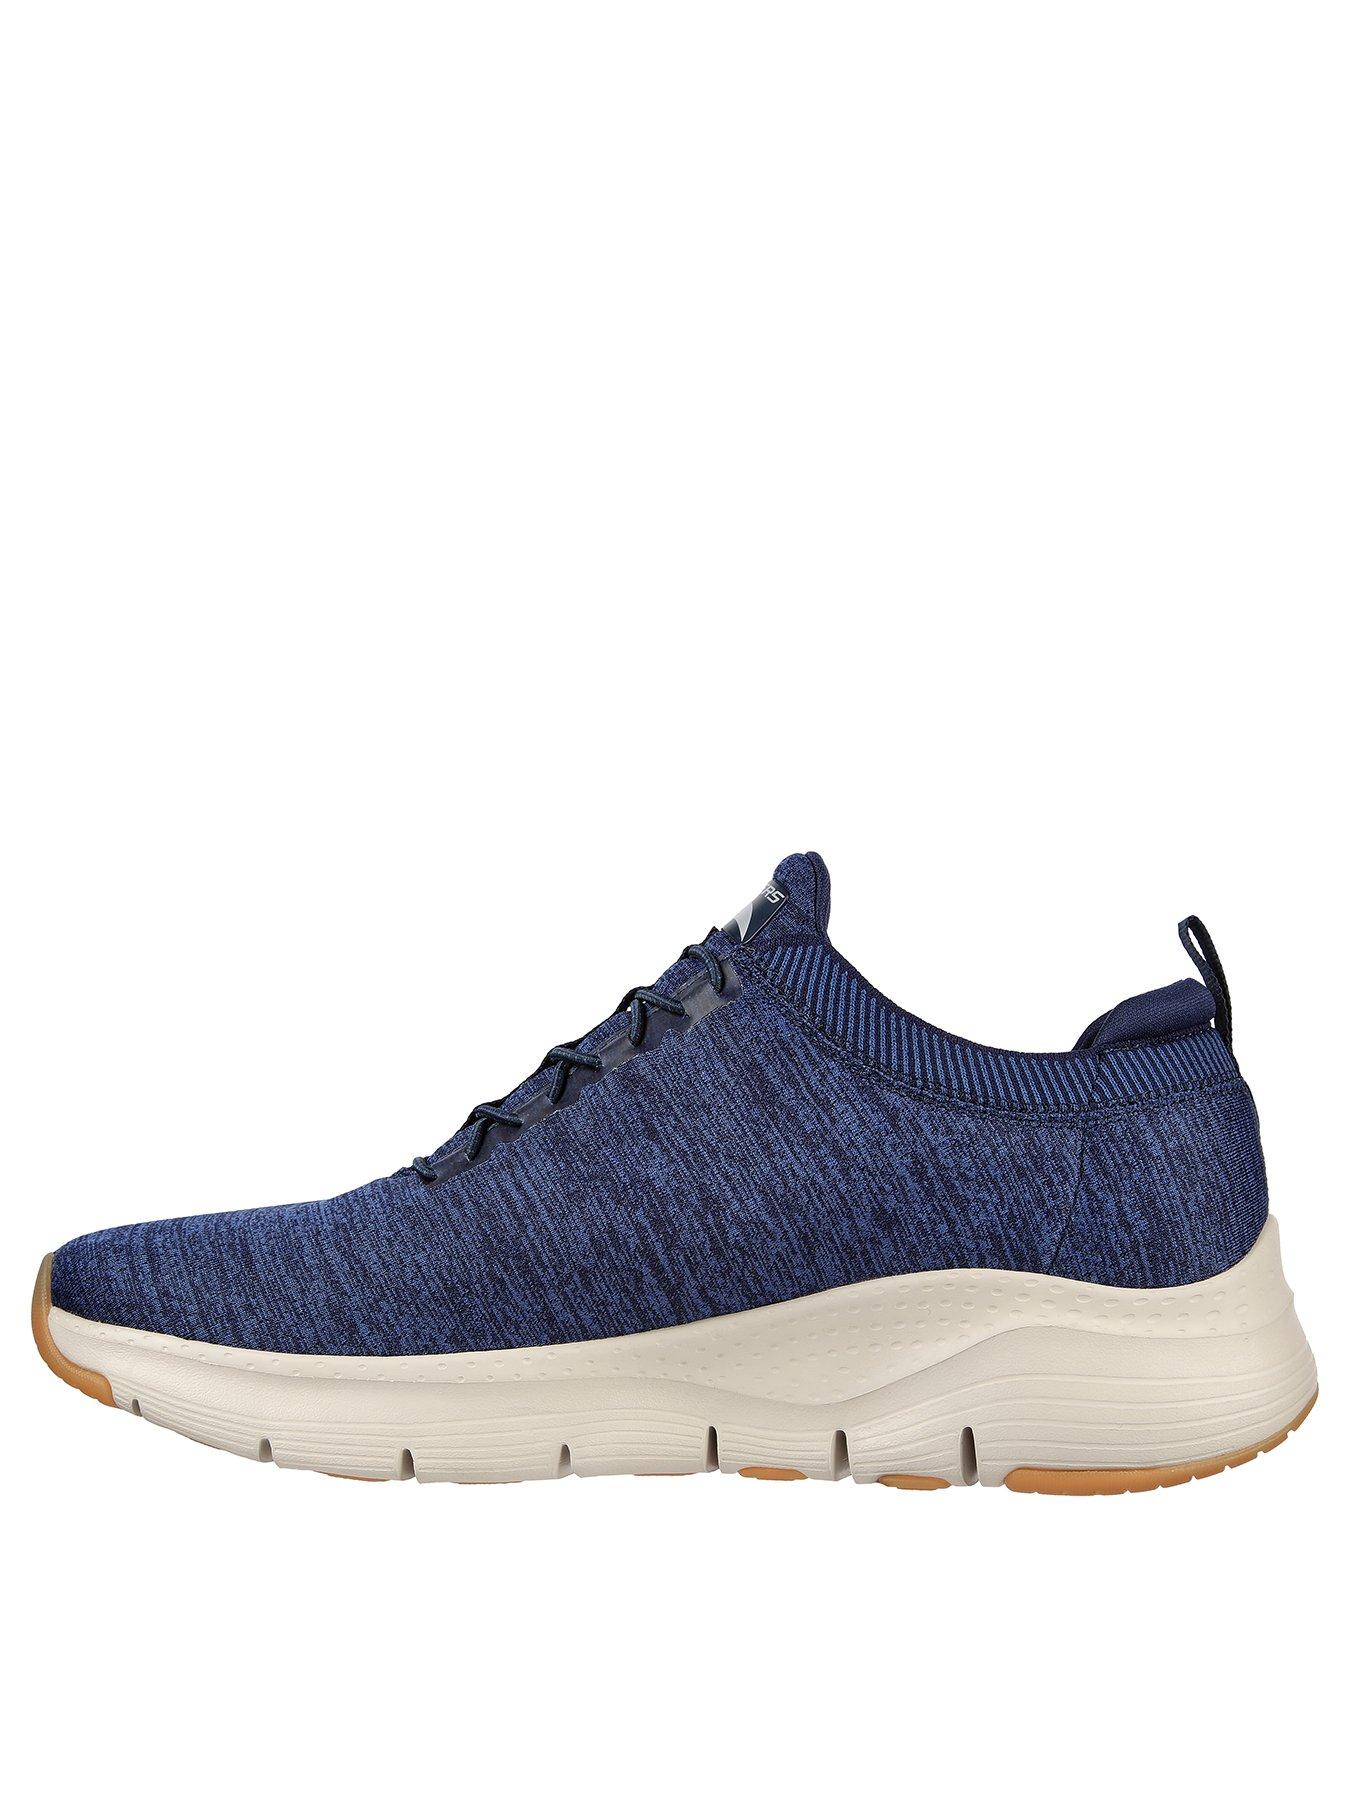 Skechers Arch Fit Stretch Lace Slip On Trainer | very.co.uk